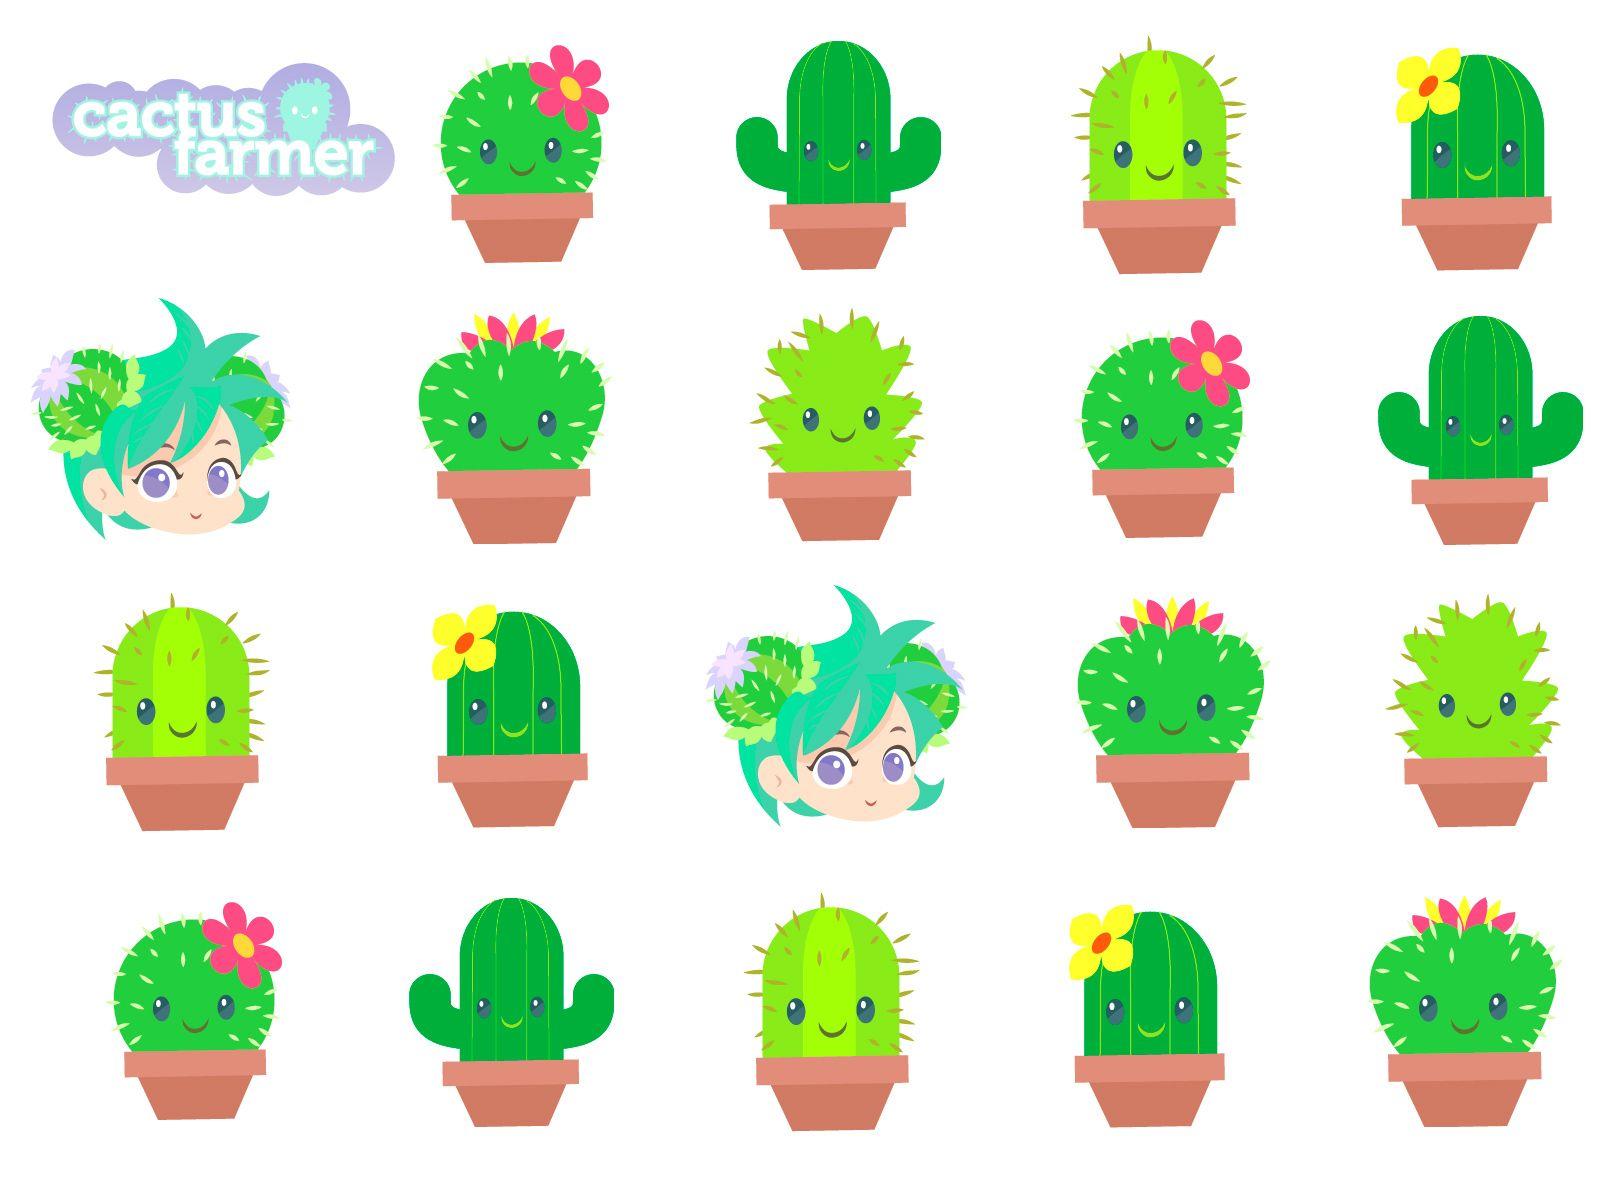 Cactus Farmer is a fun interactive game where you are in charge